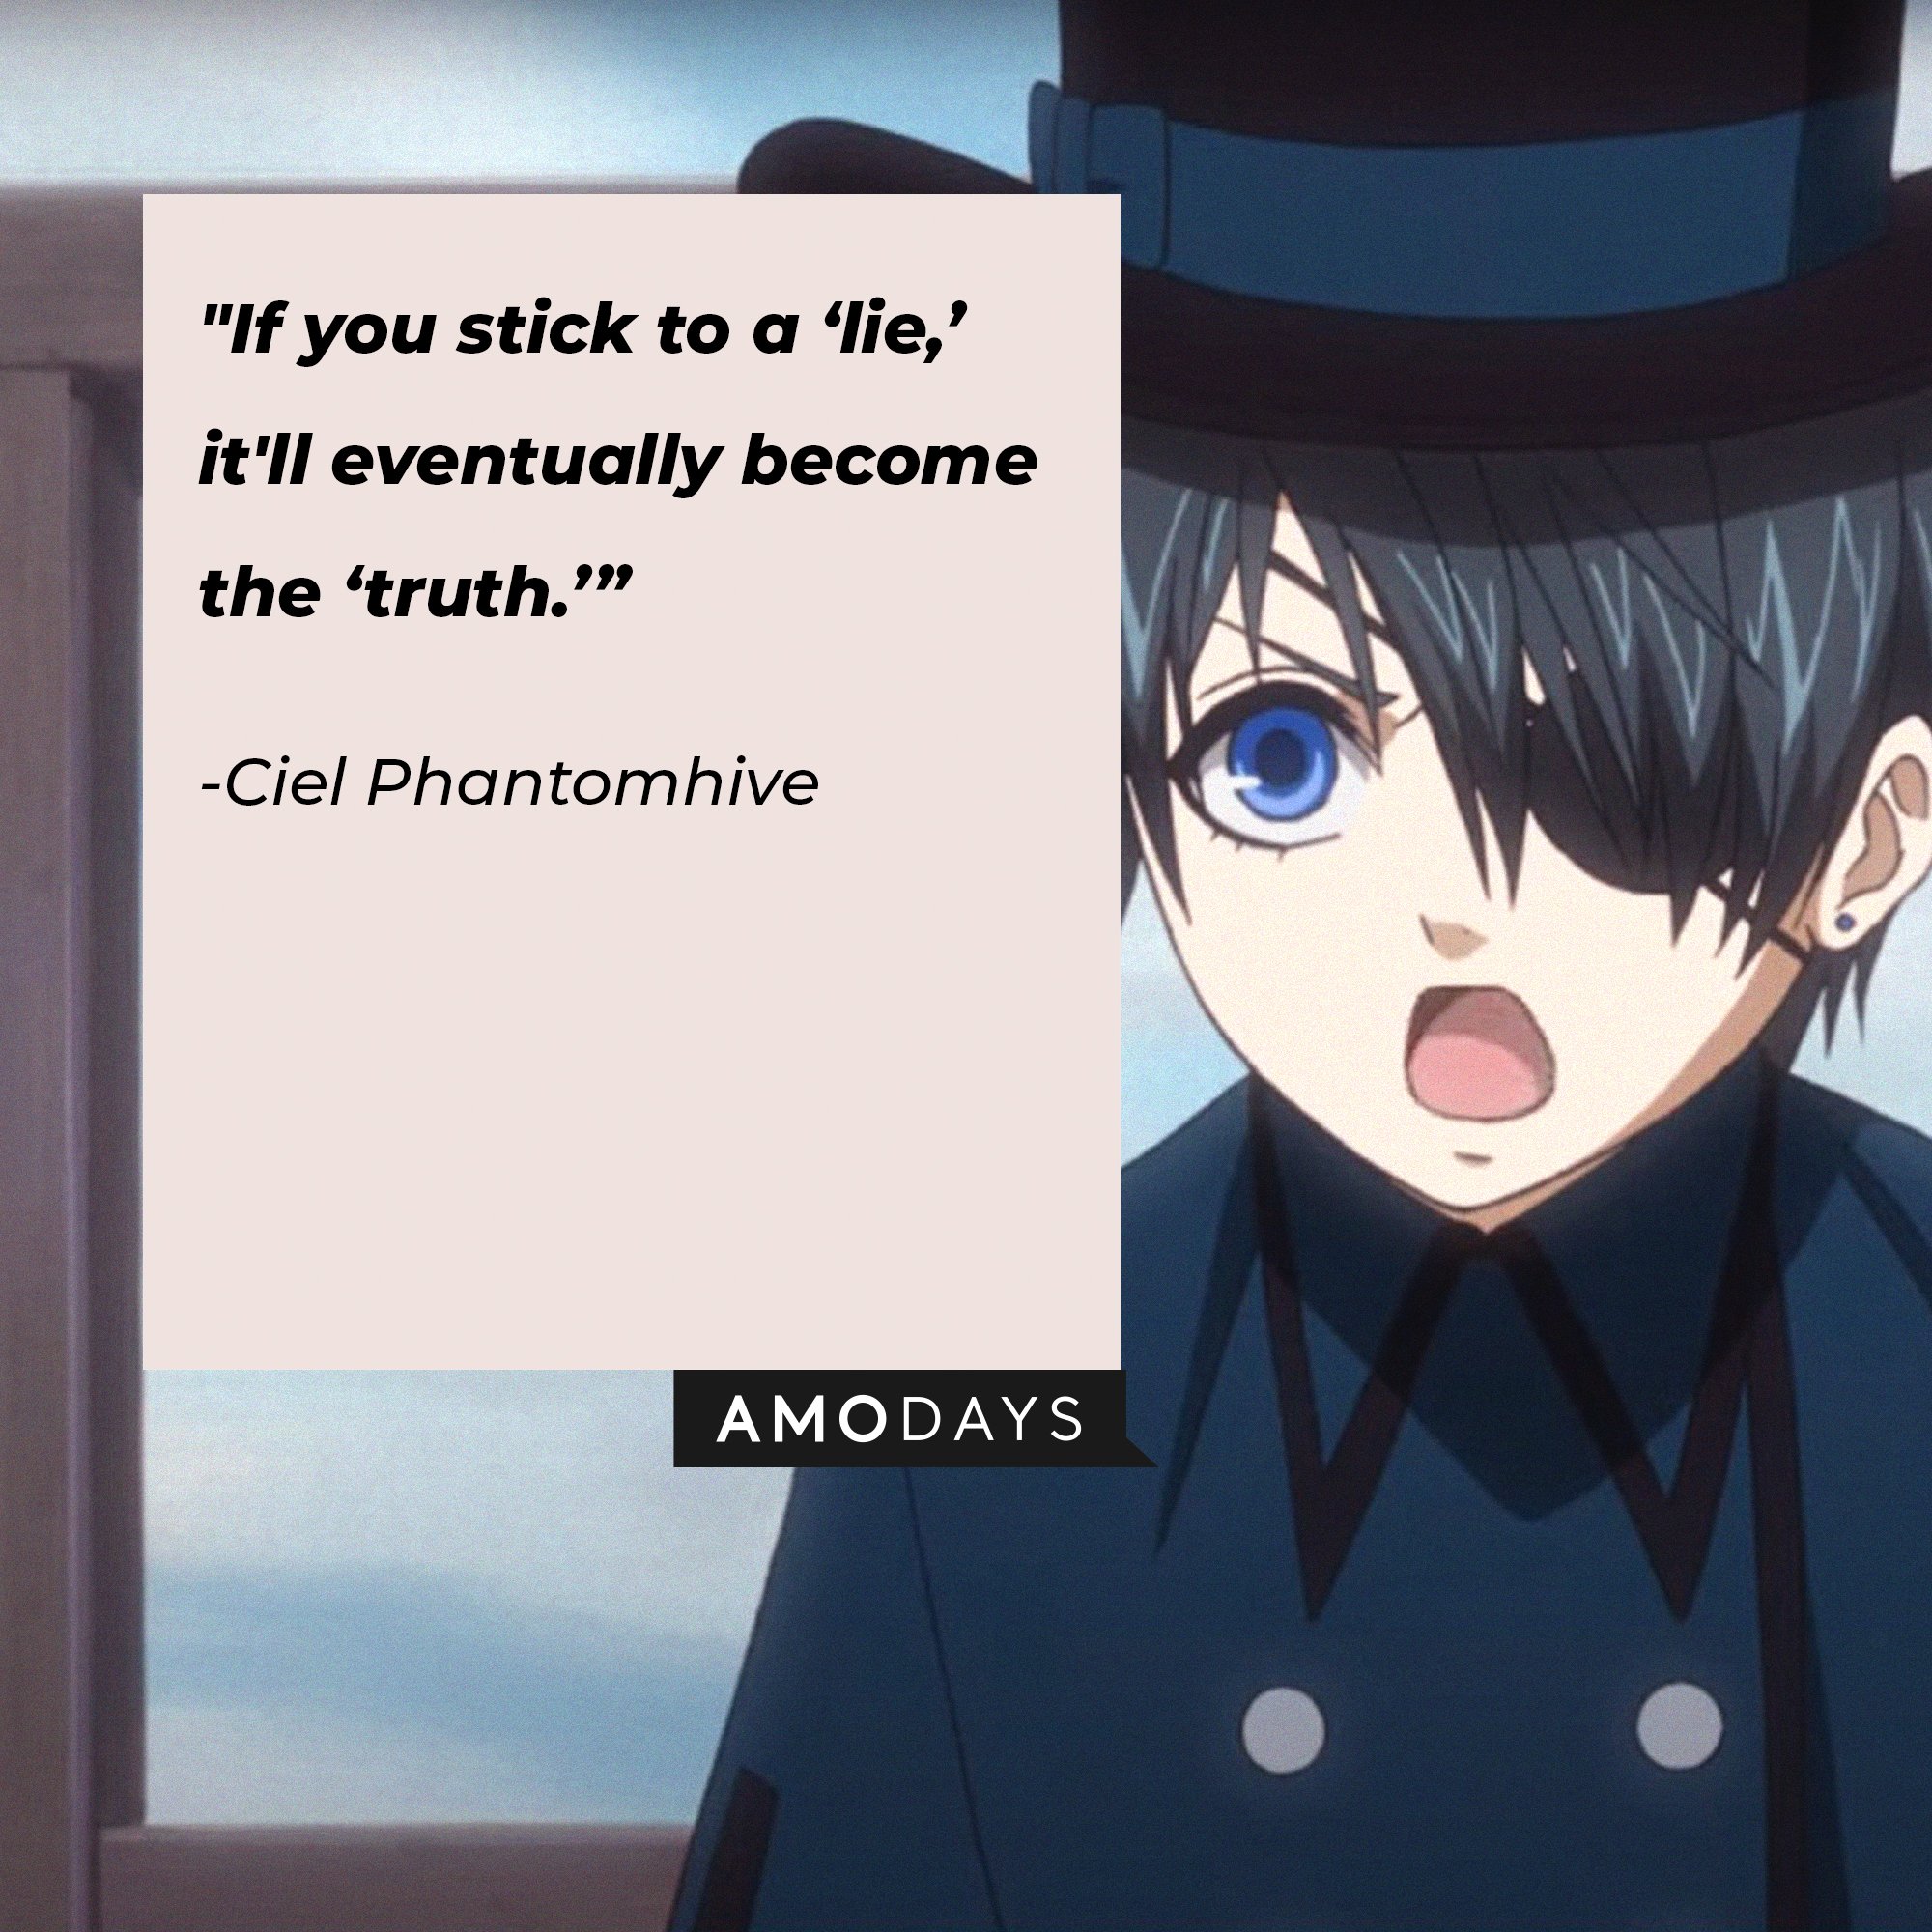 Ciel Phantomhive’s quote: "If you stick to a ‘lie,’ it'll eventually become the ‘truth.’” | Image: AmoDays